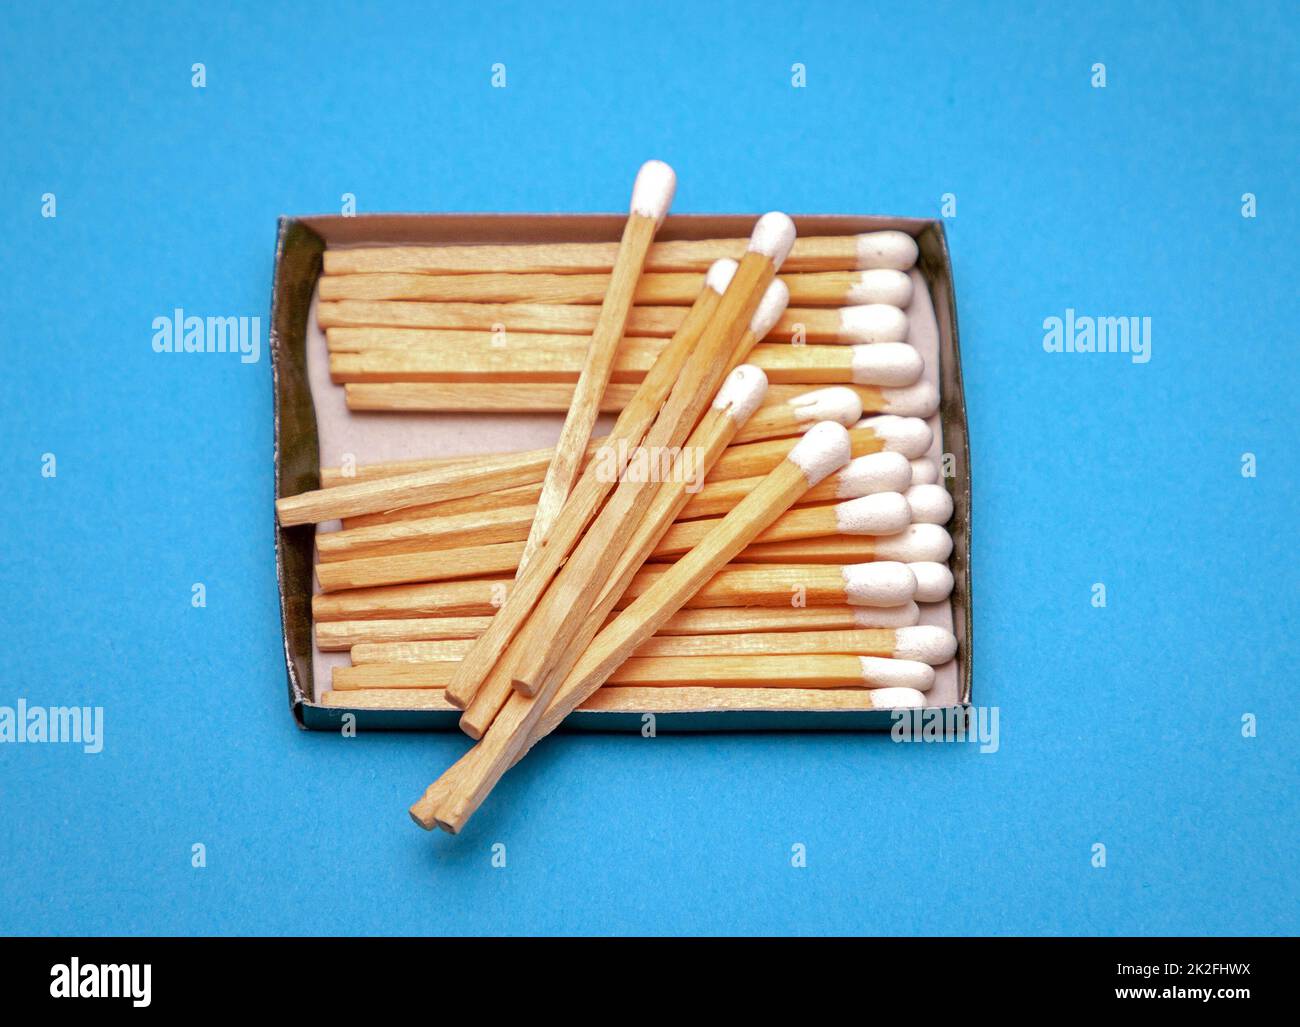 White matches in a box Stock Photo